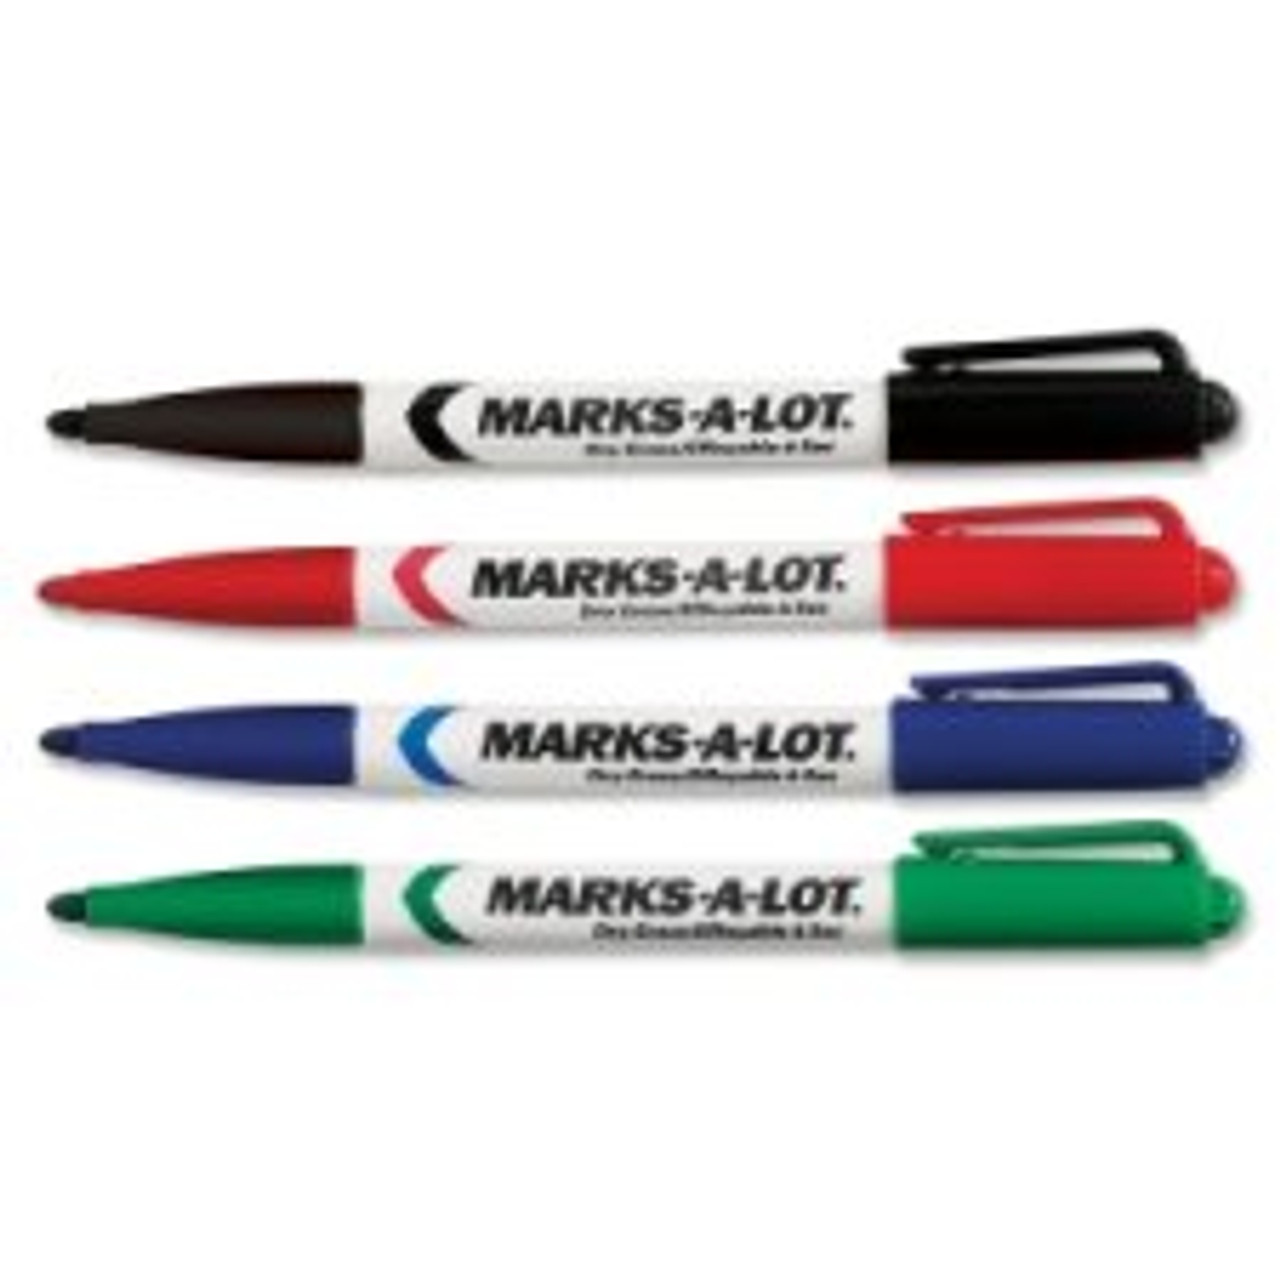 Avery Marks-a-lot Permanent Markers Bonus Pack - 4.8 Mm